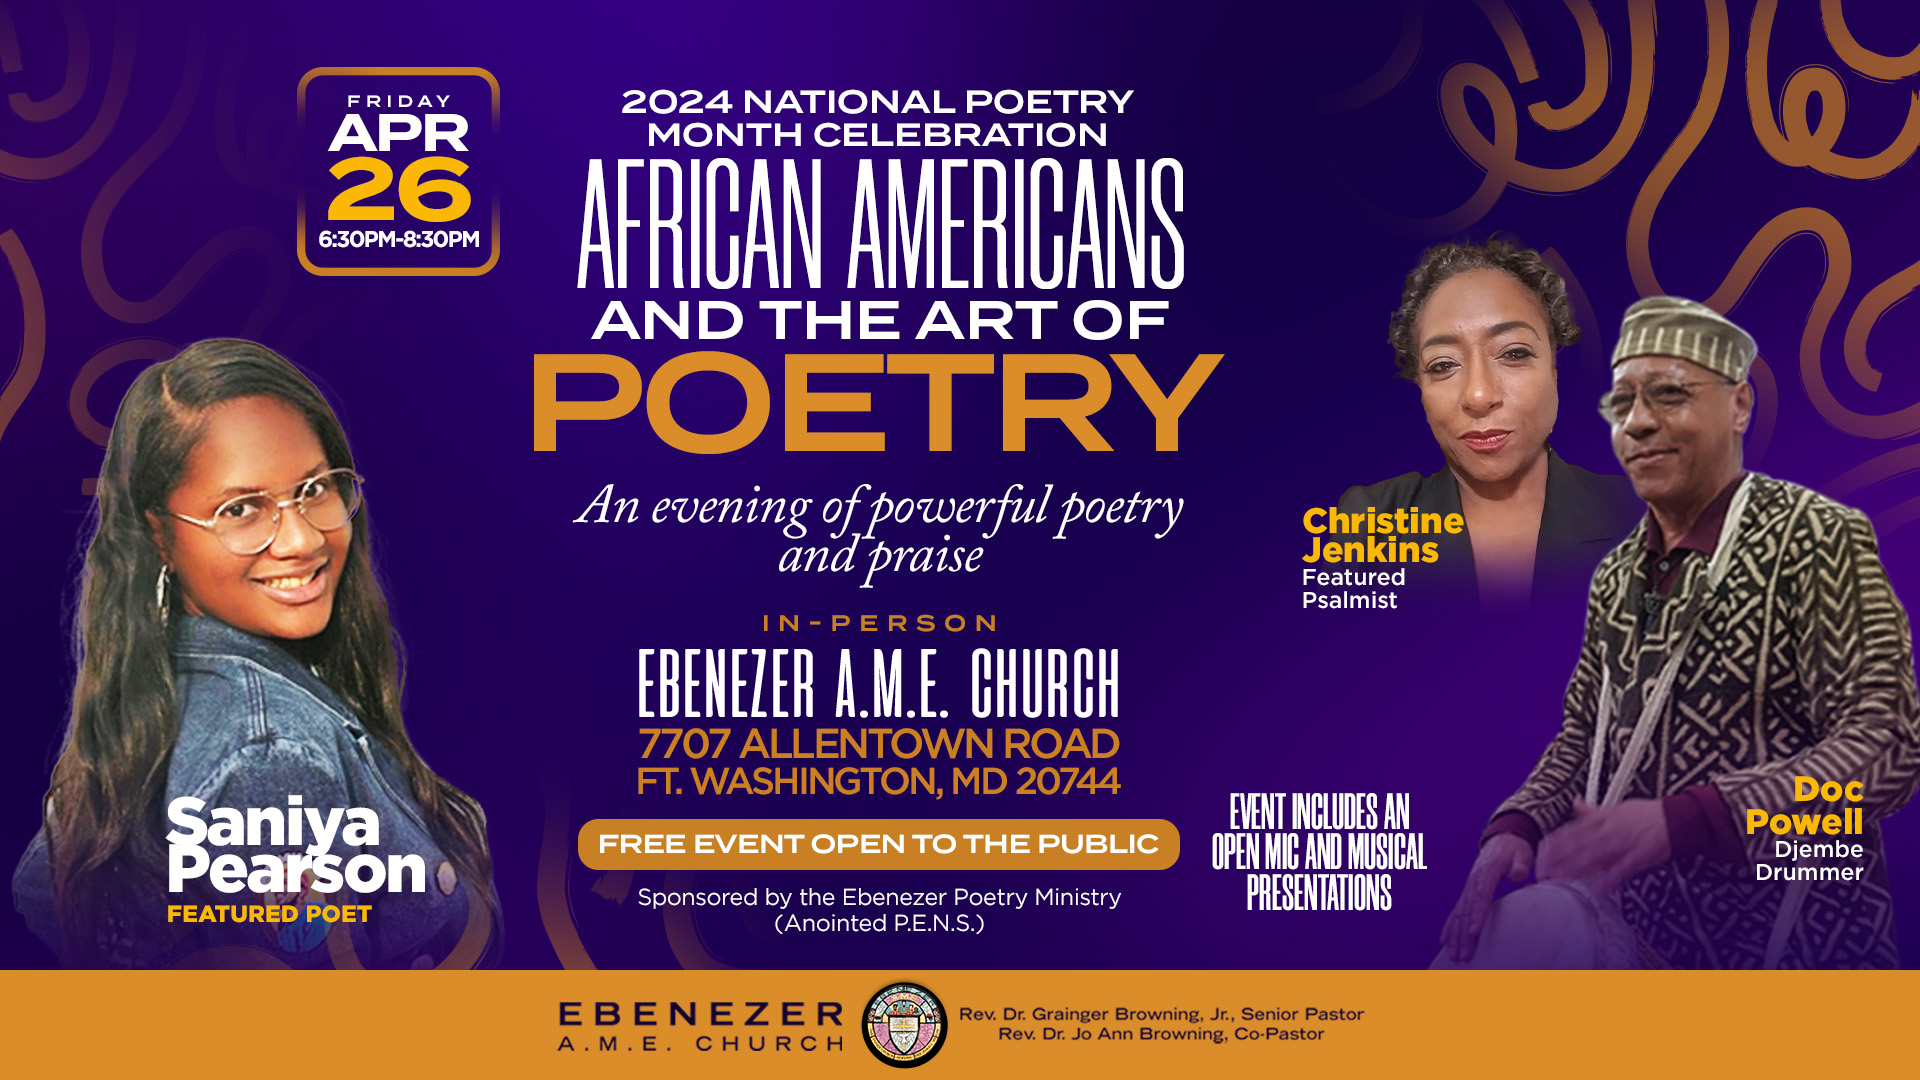 Poetry Ministry's 2024 National Poetry Month Celebration